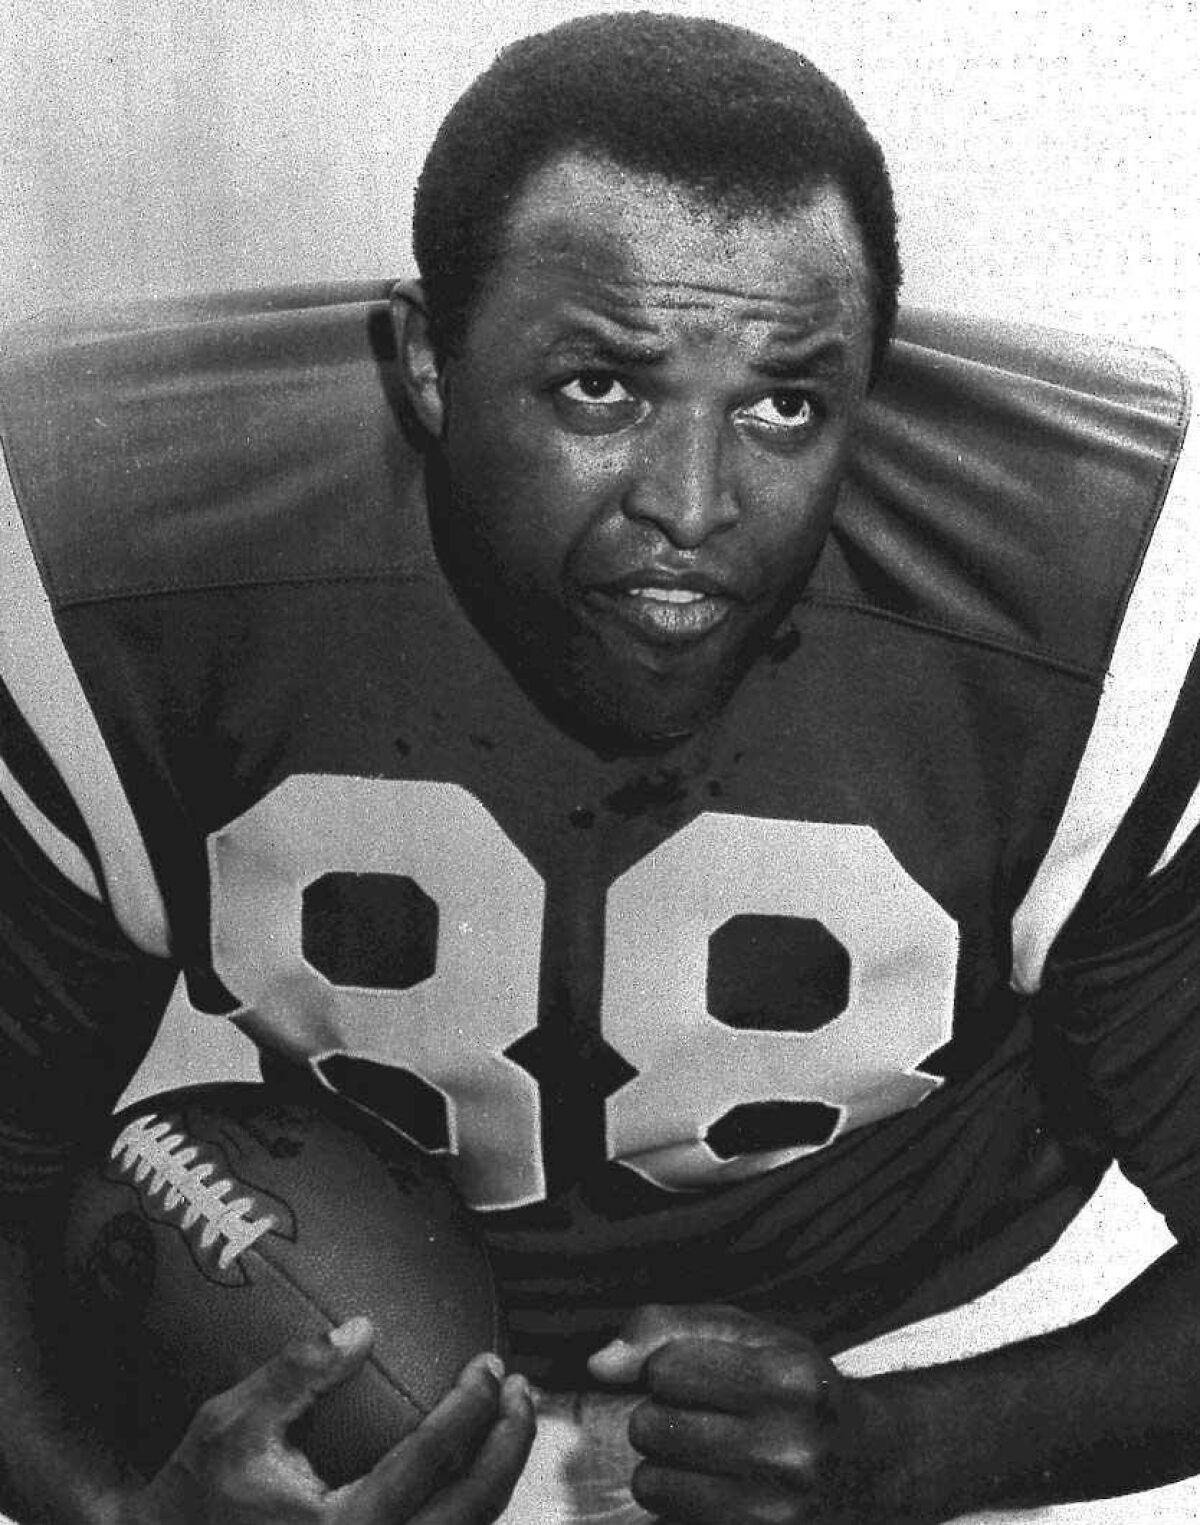 FILE ¿ This 1969 handout provided by the Baltimore Colts, shows Colts football player John Mackey. NFL Hall of Famer John Mackey has died. He was 69. Chad Steele, a spokesman for the Baltimore Ravens, said Thursday, July 7, 2011, that Mackey's wife had notified the team about her husband's death. (AP Photo/ho)